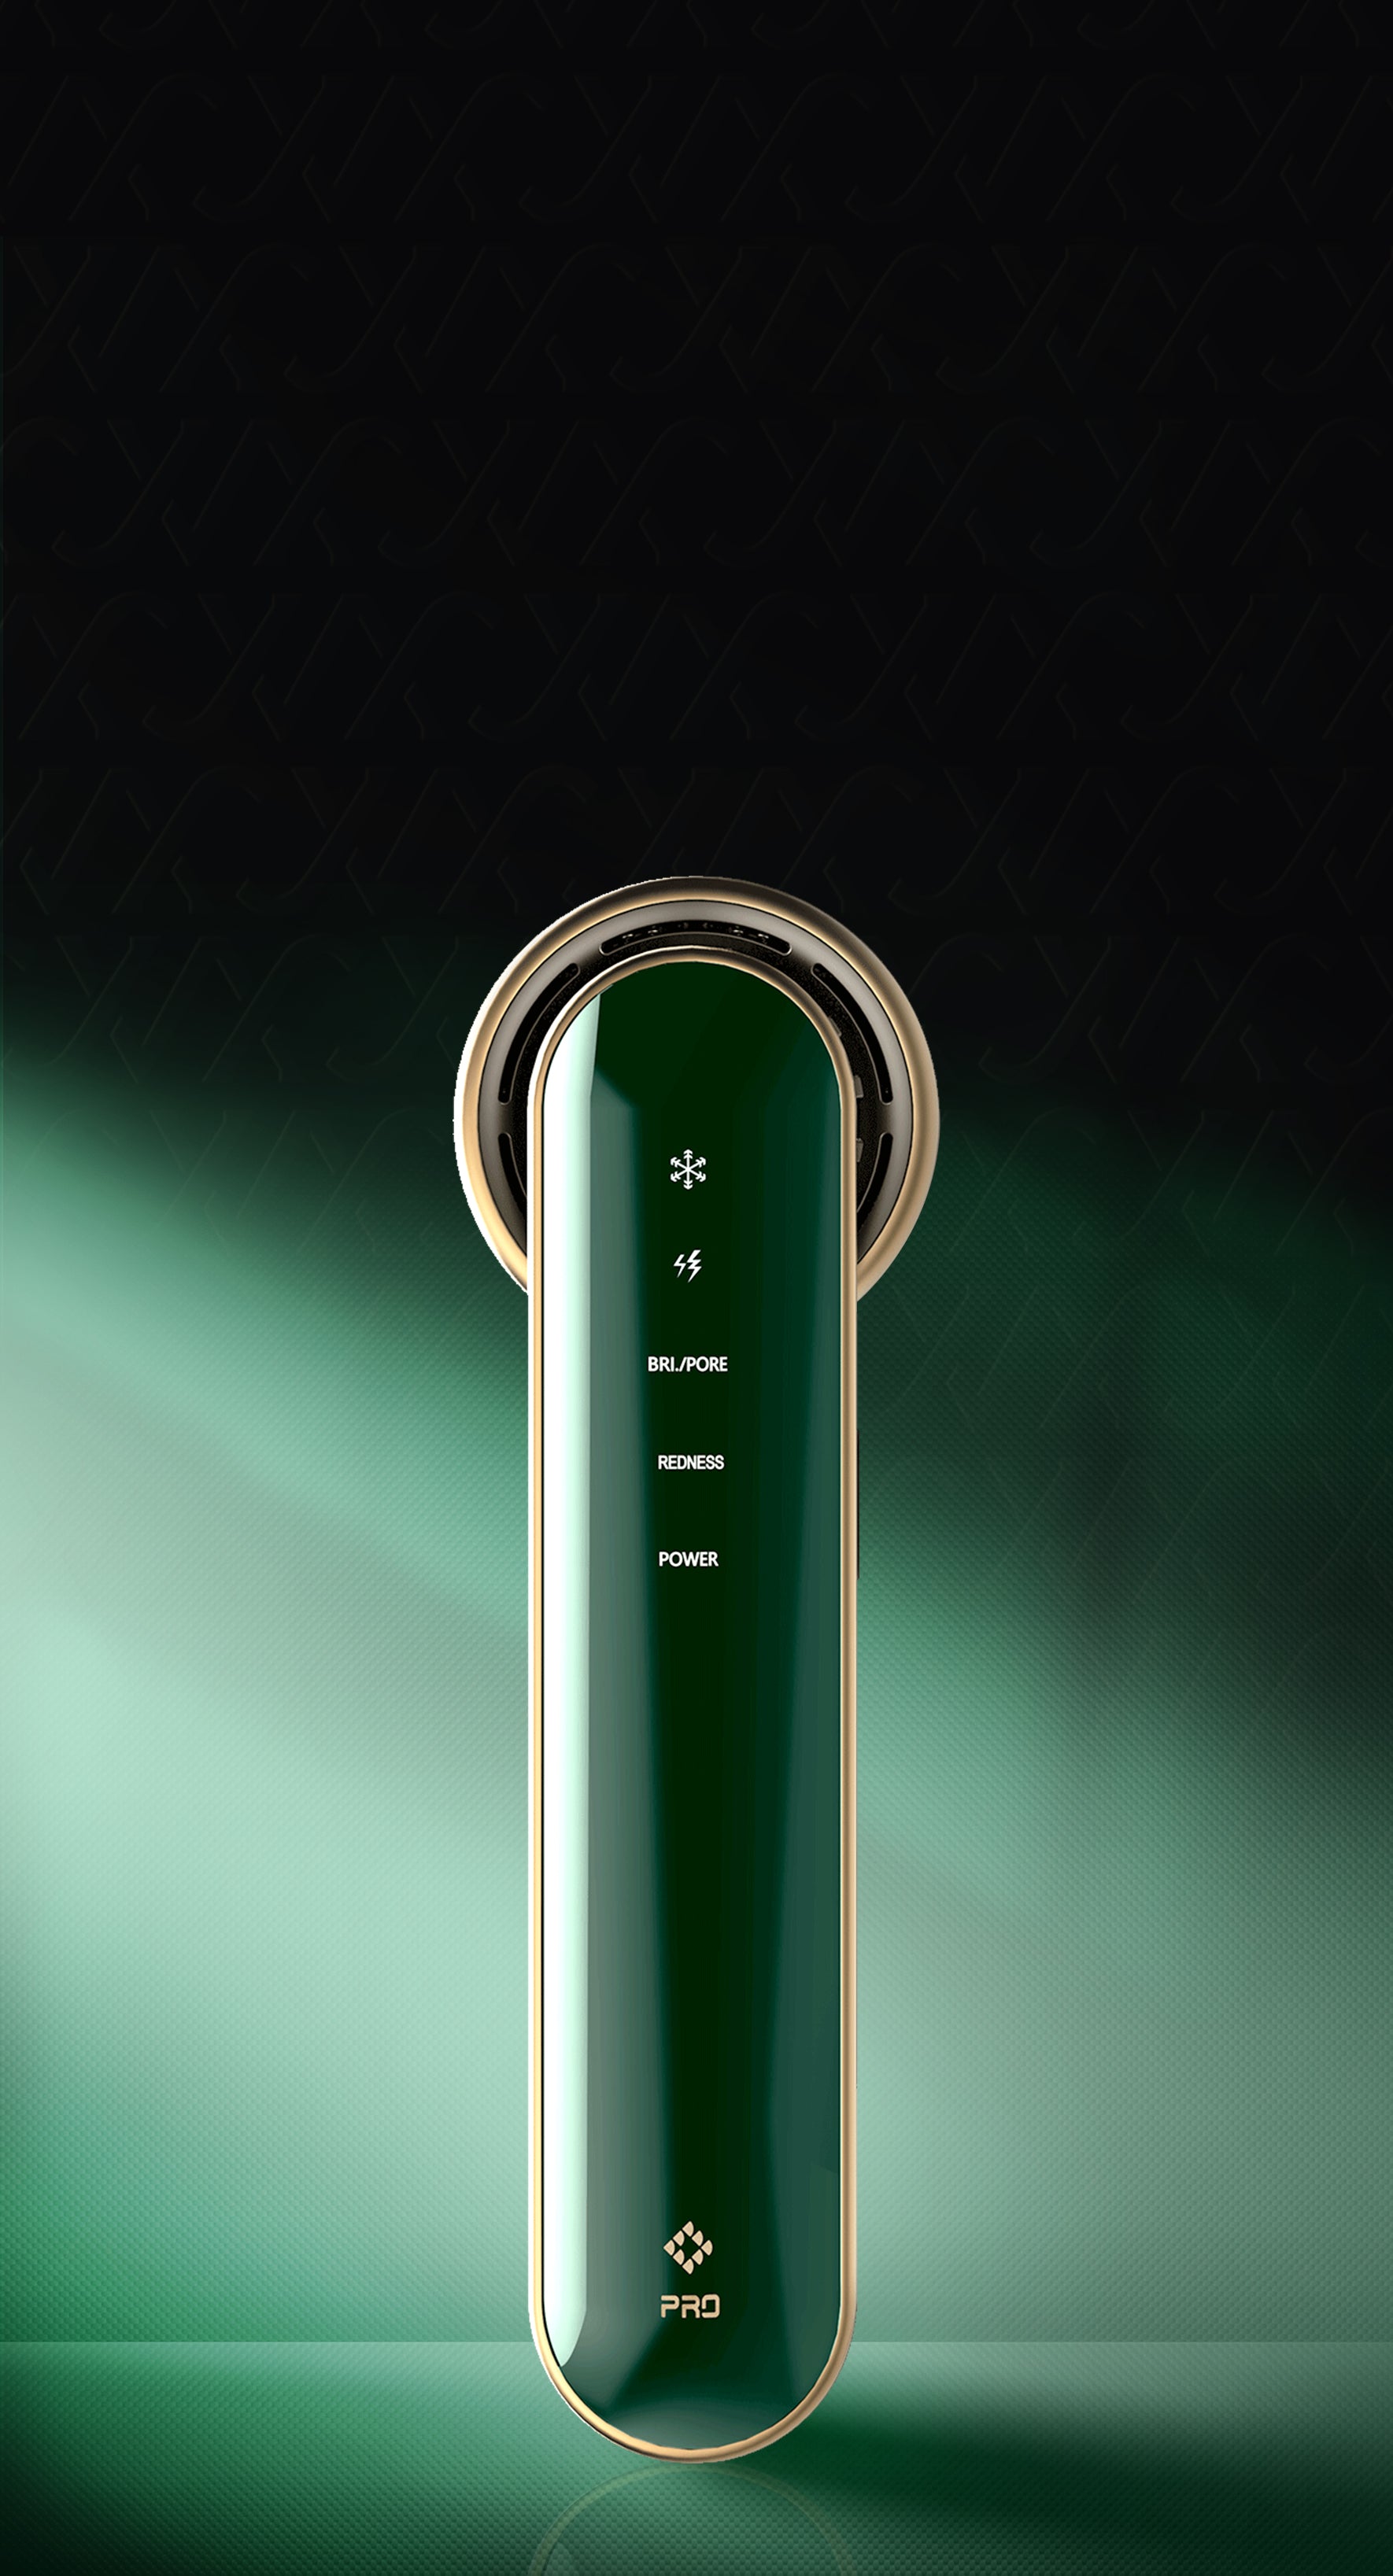 JOVS Blacken PRO DPL Photofacial Skincare Device stands against a luxurious green background, highlighting the elegant design.